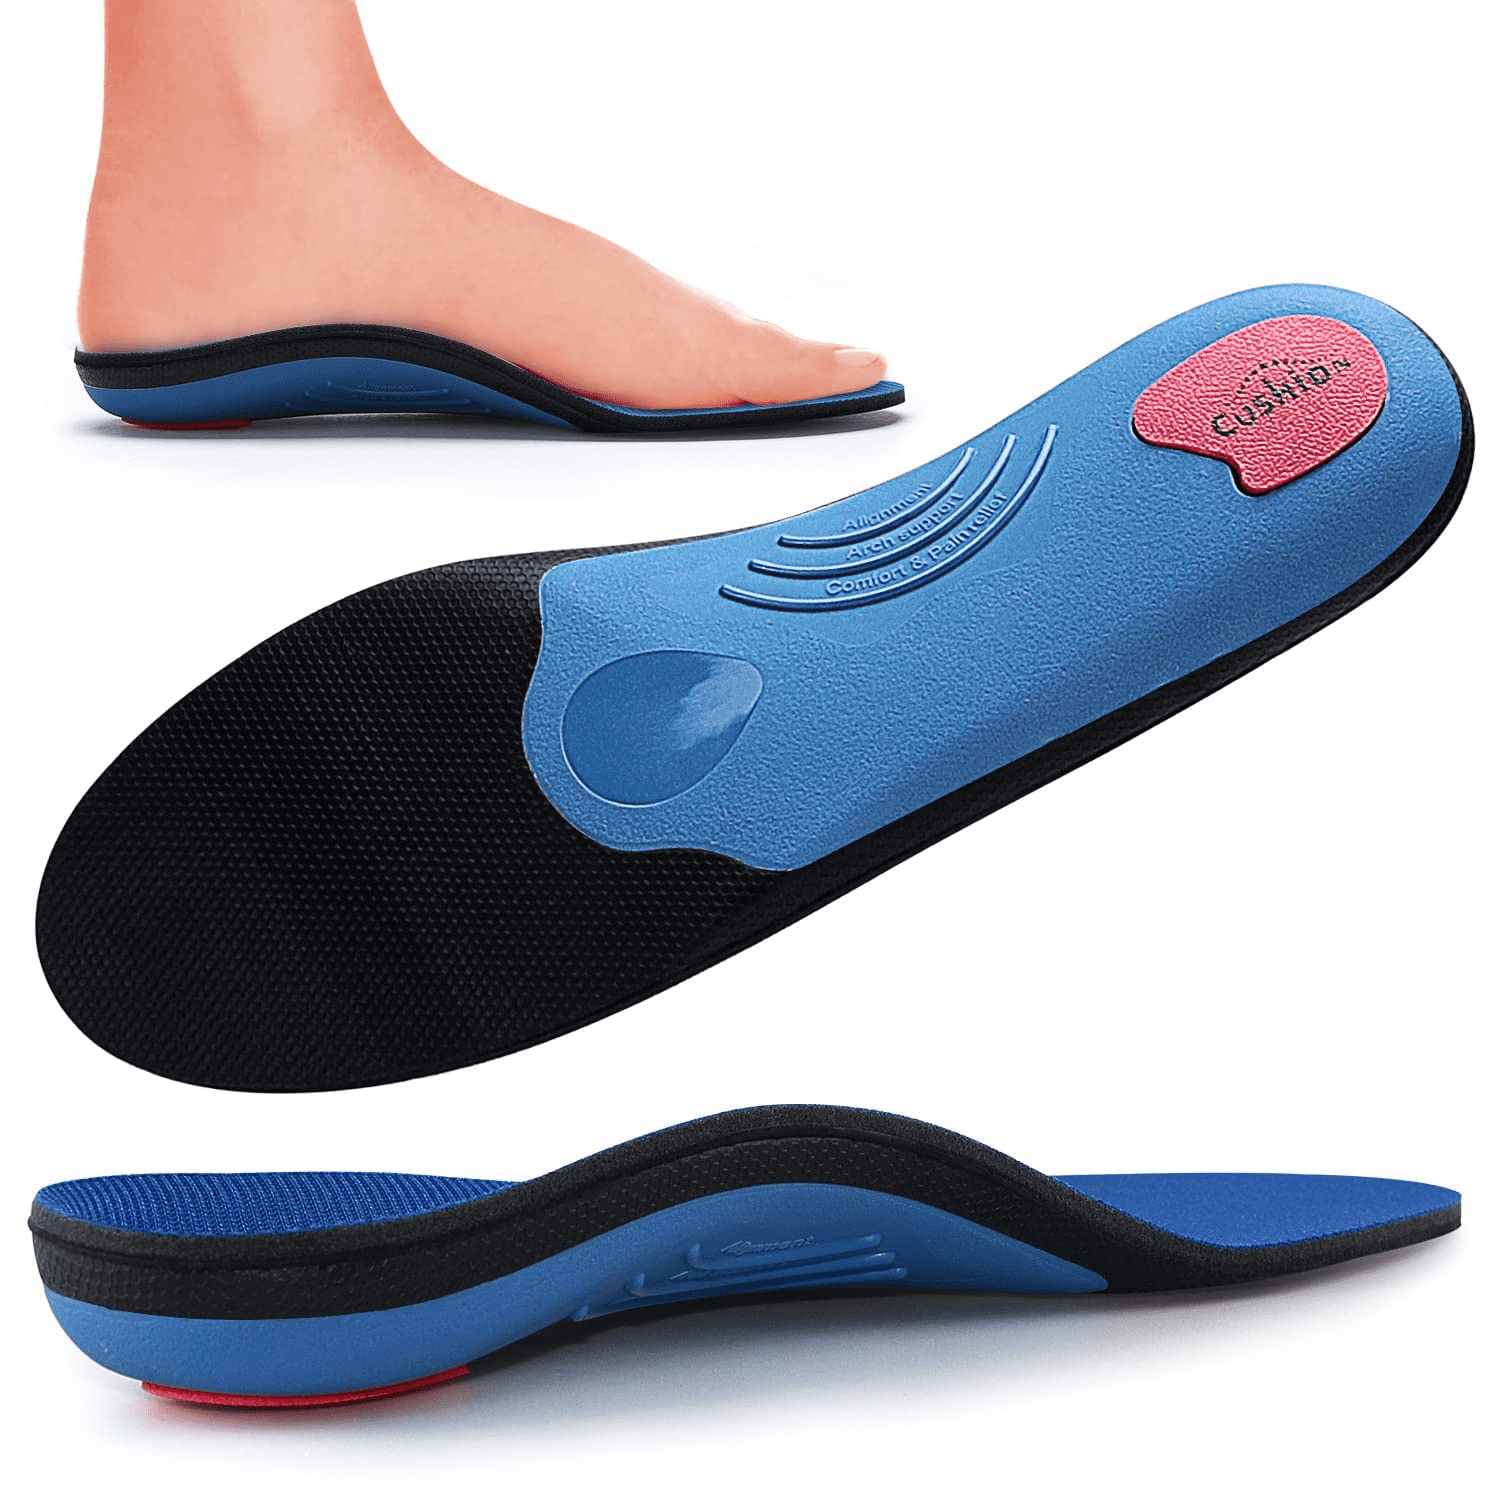 2x's Sole Control Children's Orthotic Insoles arch supports all sizes Pronation 